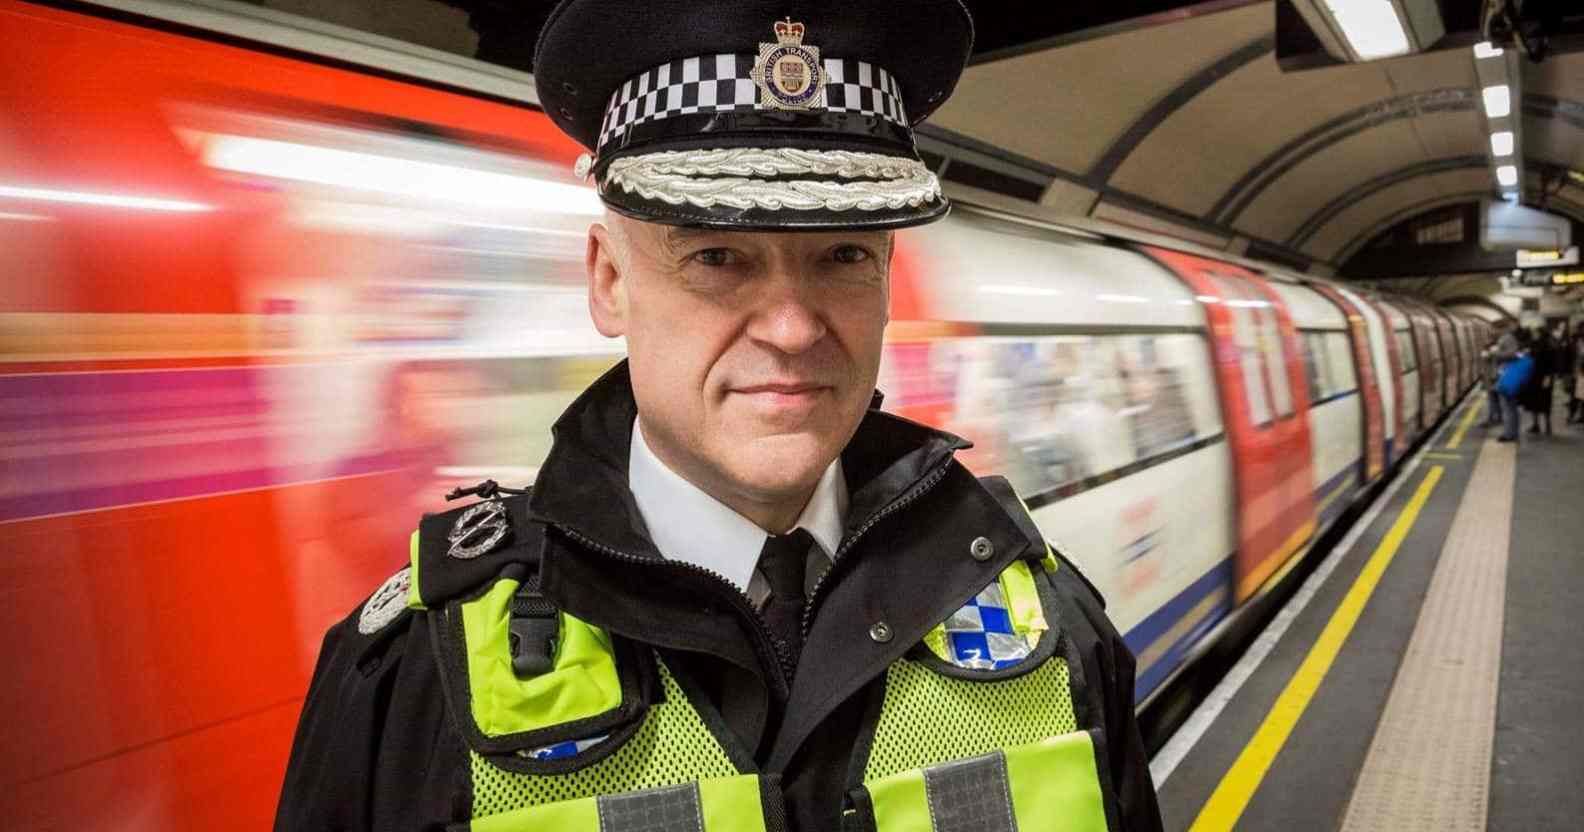 Adrian Hanstock, a police officer wearing a yellow h-vis vest, black jacket and tie and a police cap, standing on a Tube platform as a train speeds past